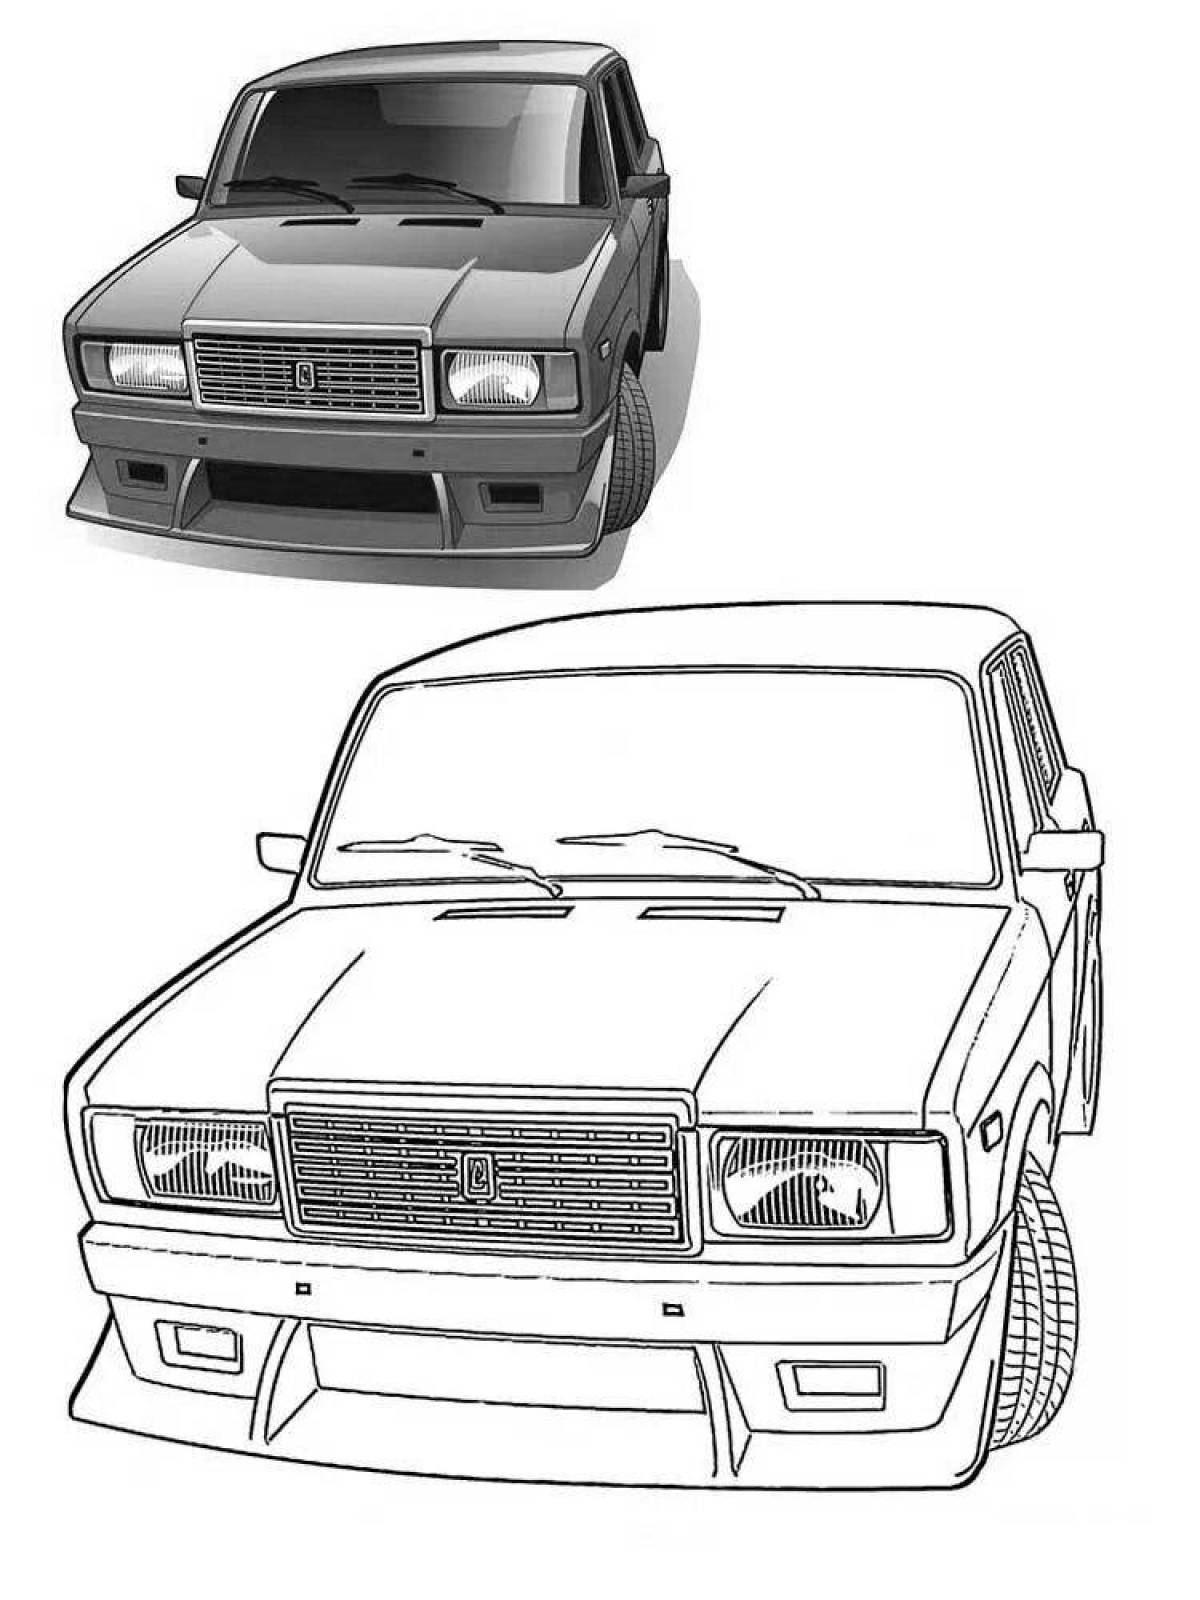 Coloring page amazing vaz cars